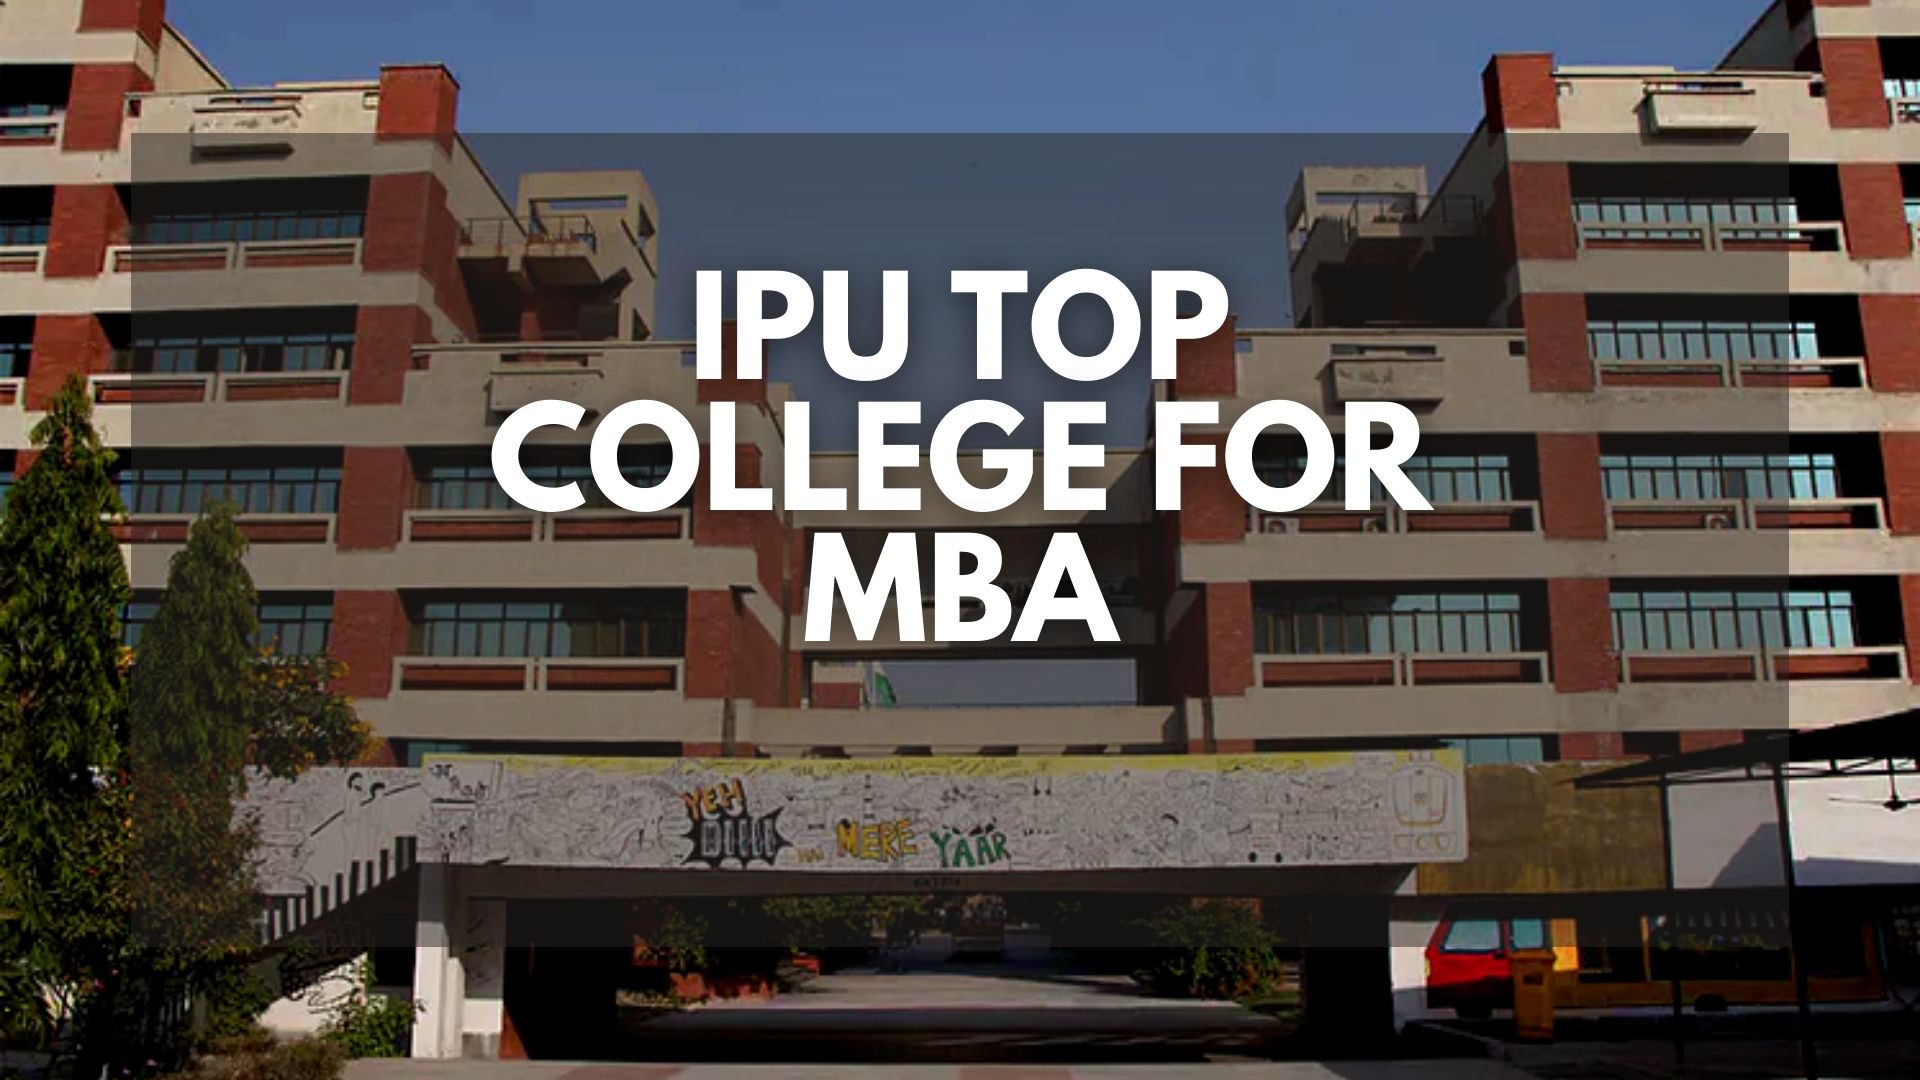 MBA TOP COLLEGES in IPU